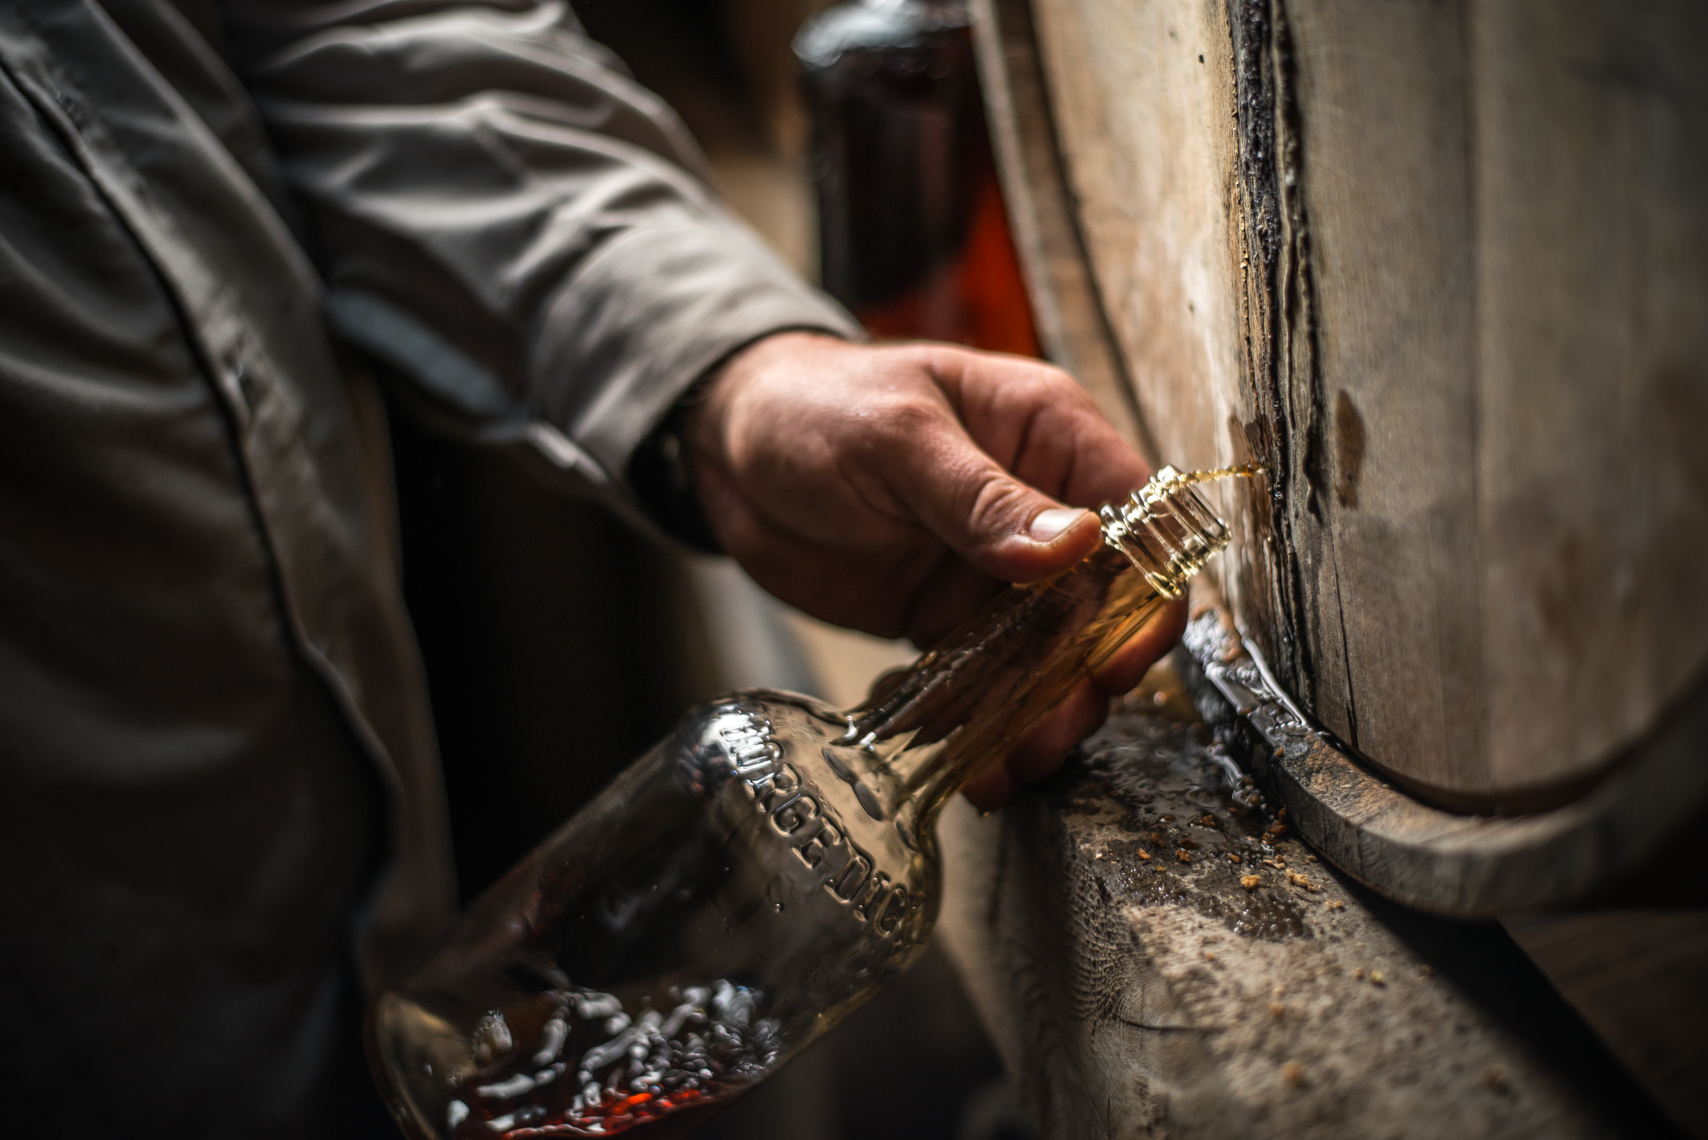 Food, Spirits, Travel, Editorial, Photographer, industrial, Reportage, Travel, Narrative, Photojournalist, Louisville, Kentucky, Southern, lifestyle, real life, real people, at work, working, stock photography, reportage, Kristina Krug, Nashville, barrels, bourbon, whisky, photojournalism,